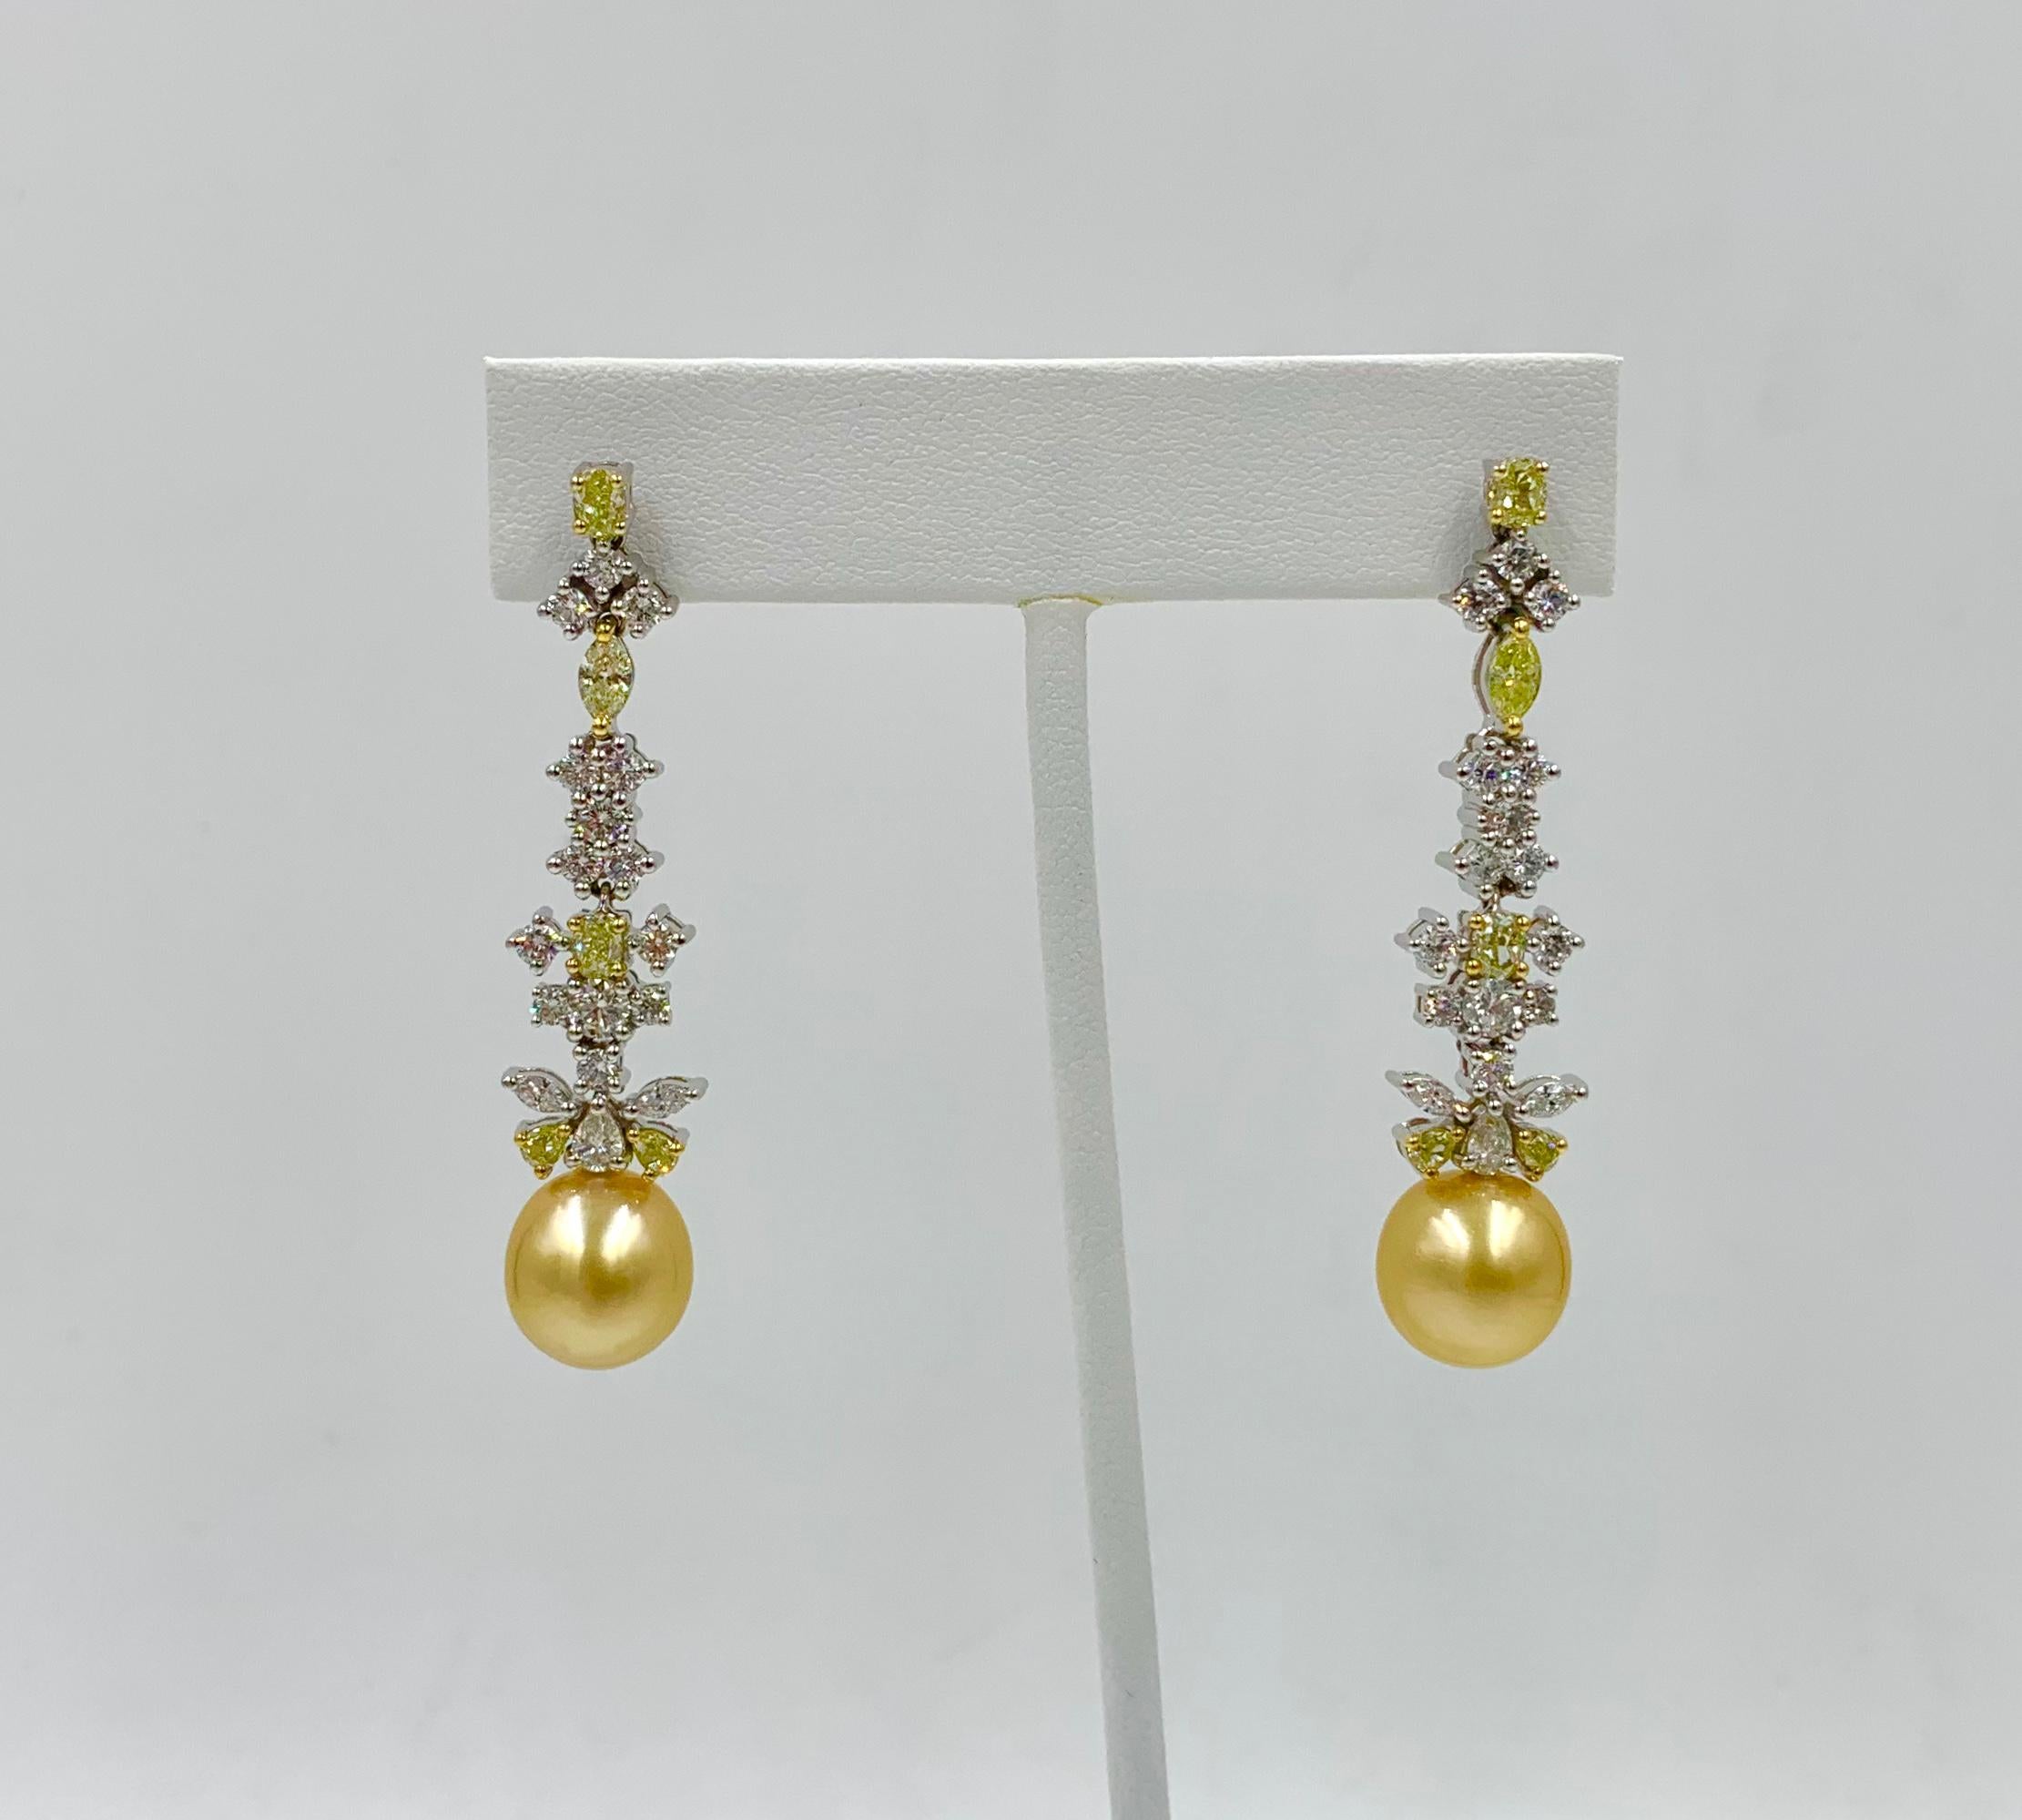 This is a magnificent pair of Four Carat Yellow Diamond, Diamond and Golden South Sea Pearl Pendant Dangle Earrings with 44 gorgeous diamonds set in 18 Karat White Gold.  The extraordinary earrings are a dramatic 2 1/8 inches long.  The earrings are